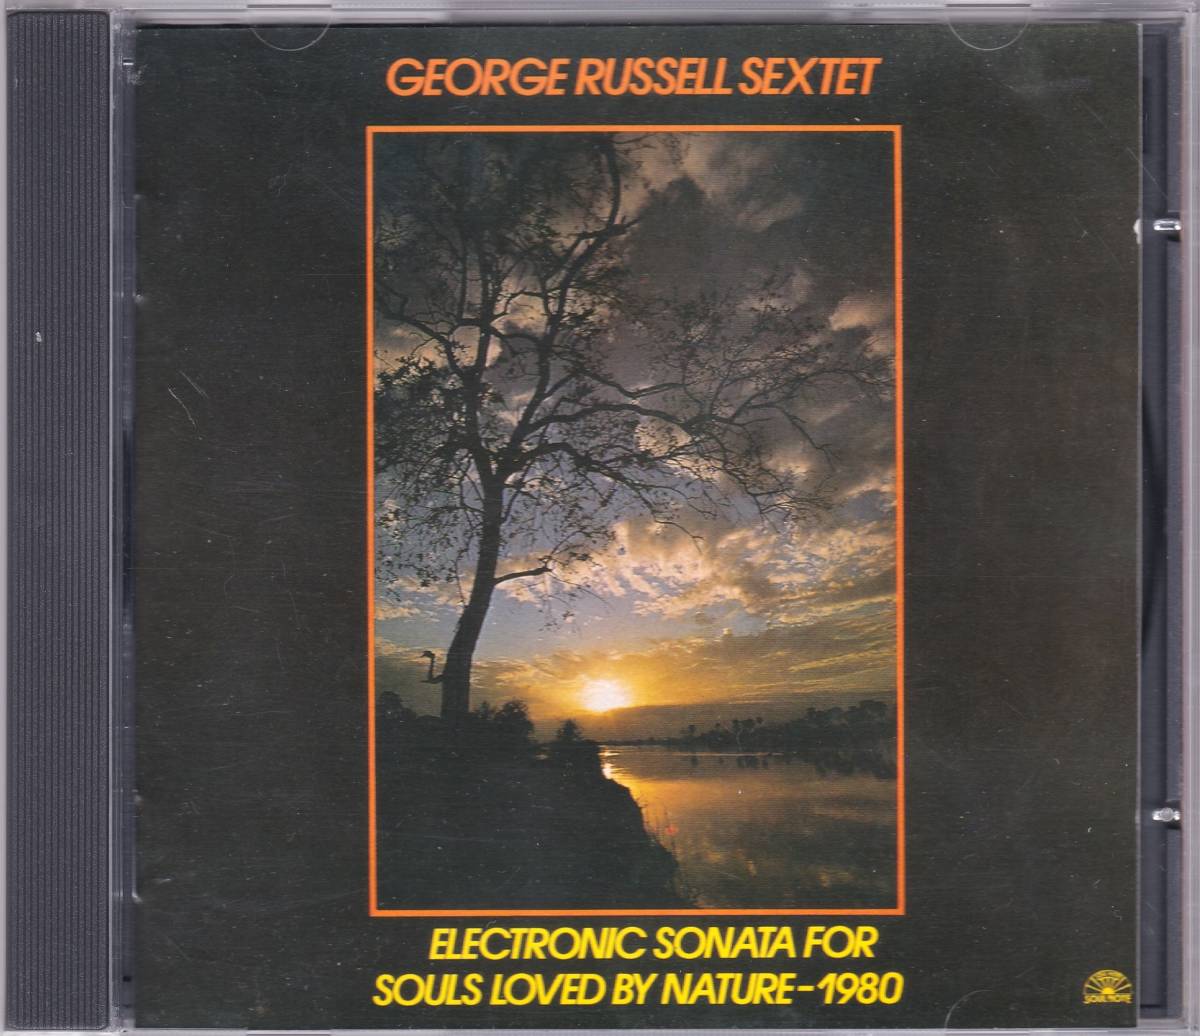 ☆GEORGE RUSSELL(ジョージ・ラッセル) SEXTET/Electronic Sonata For Souls Loved By Nature◆80年イタリア録音の超大名盤◇初CD化＆廃盤_画像1